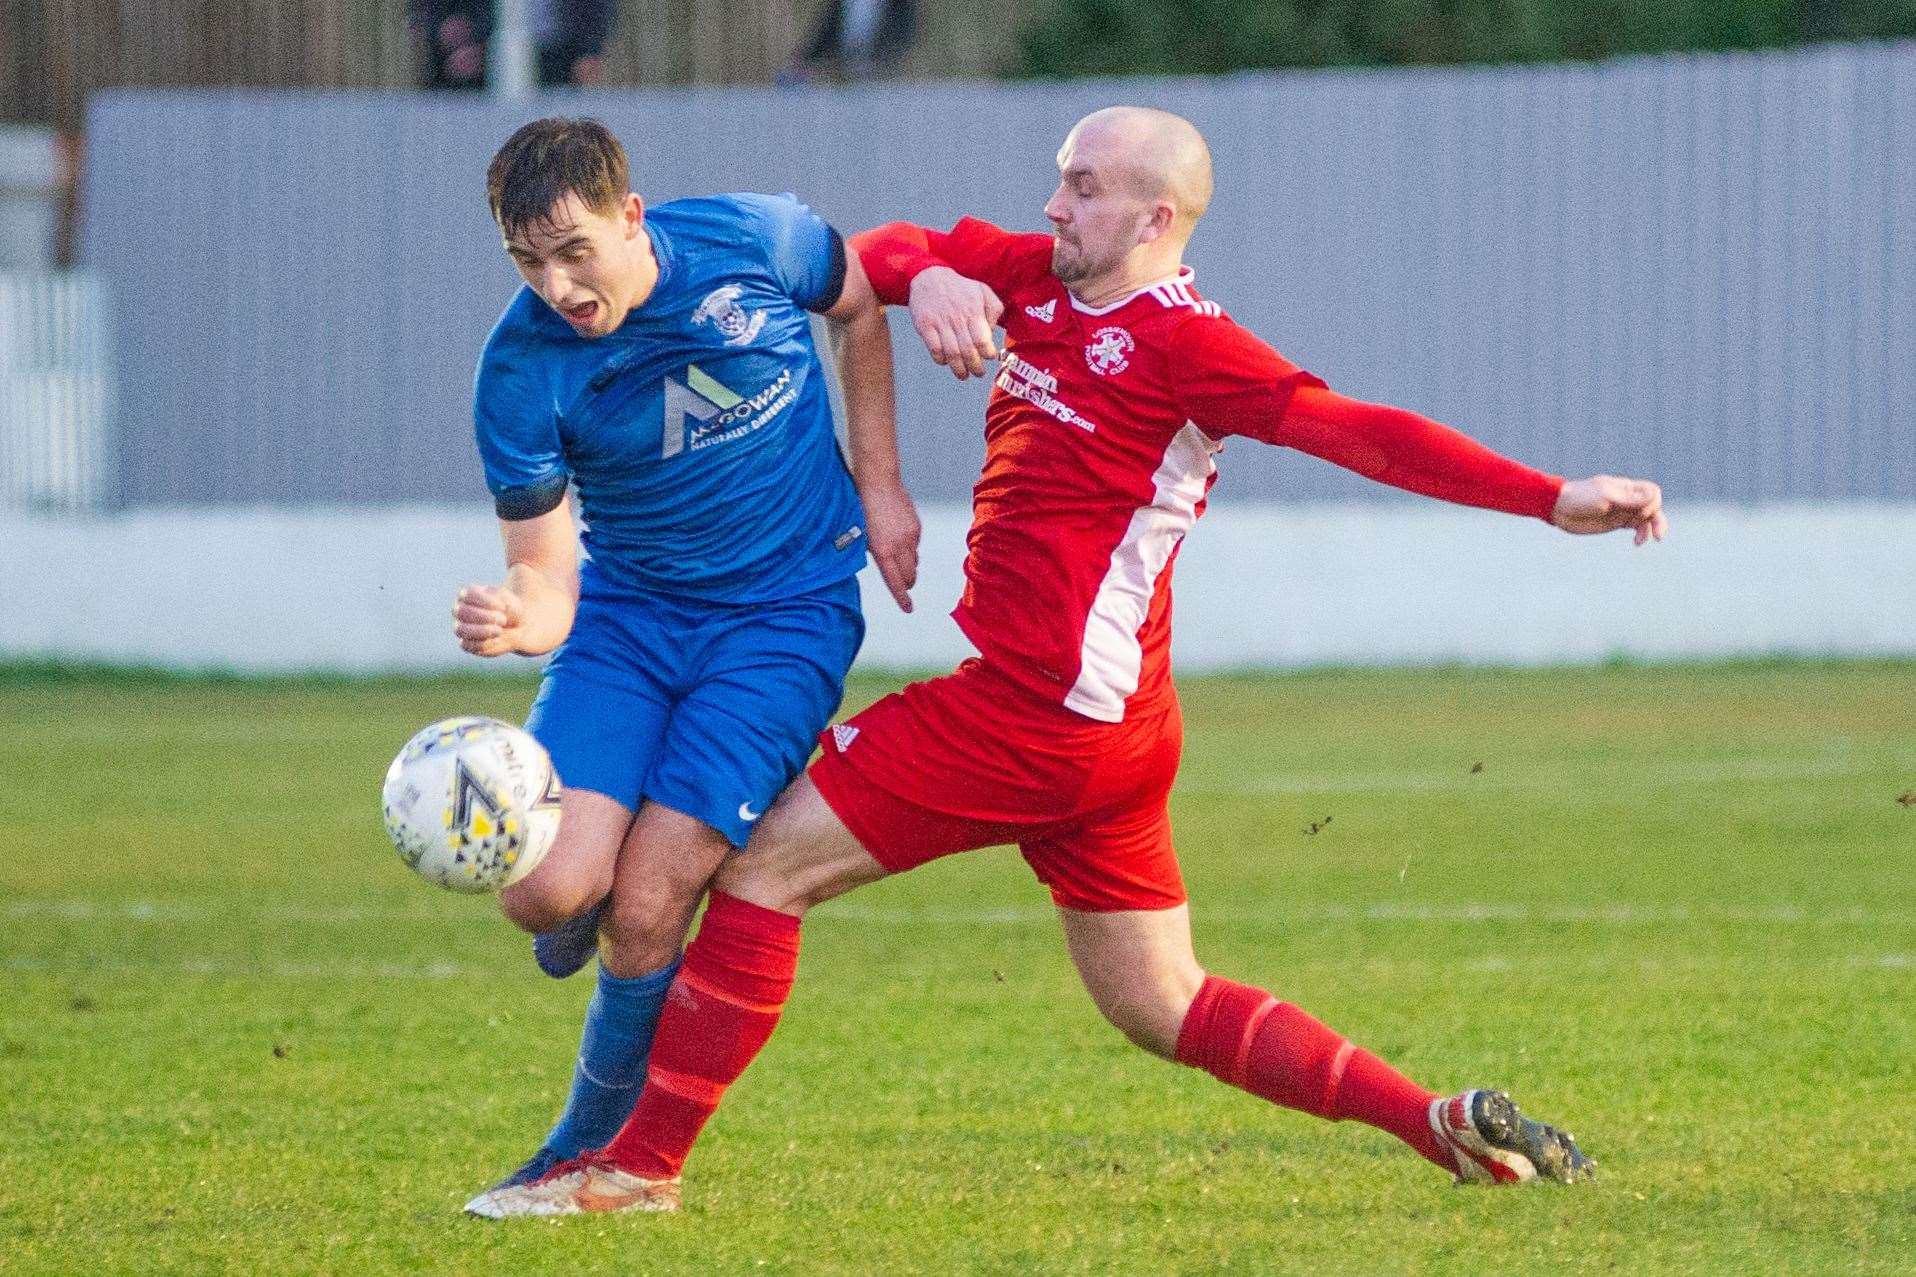 Lossiemouth FC's Connor Macaulay goes in for a solid challenge on the Jags' James McShane in Thistle's 2-0 win on January 4, 2020. Picture: Daniel Forsyth..